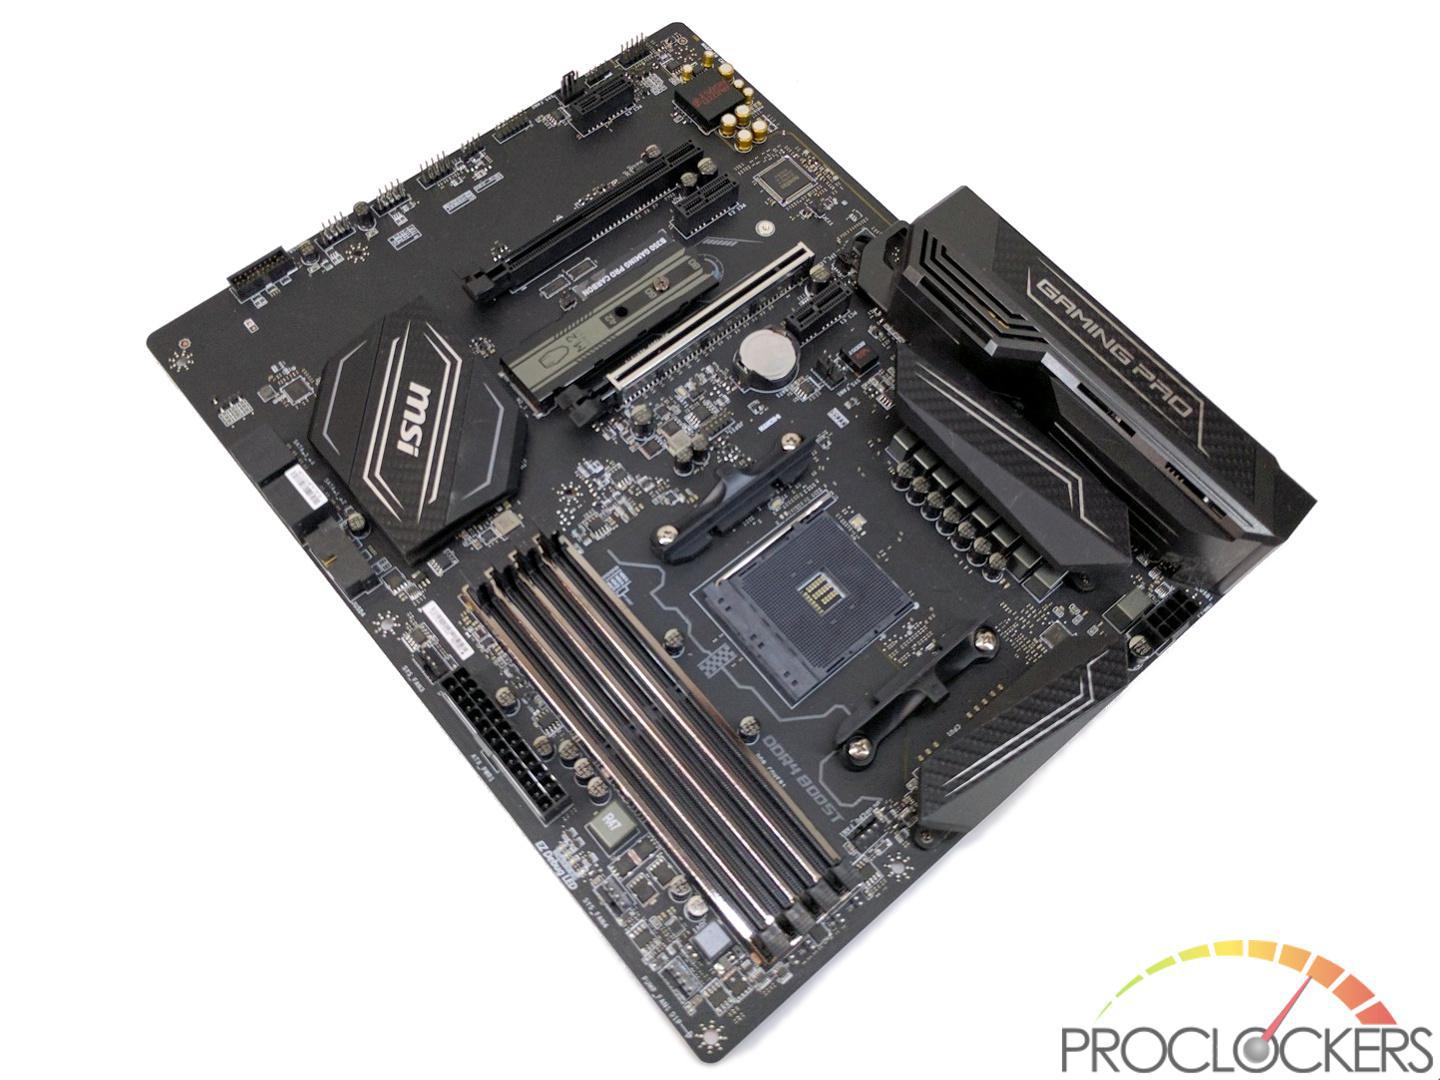 MSI B350 Gaming Pro Carbon Motherboard Review | ProClockers